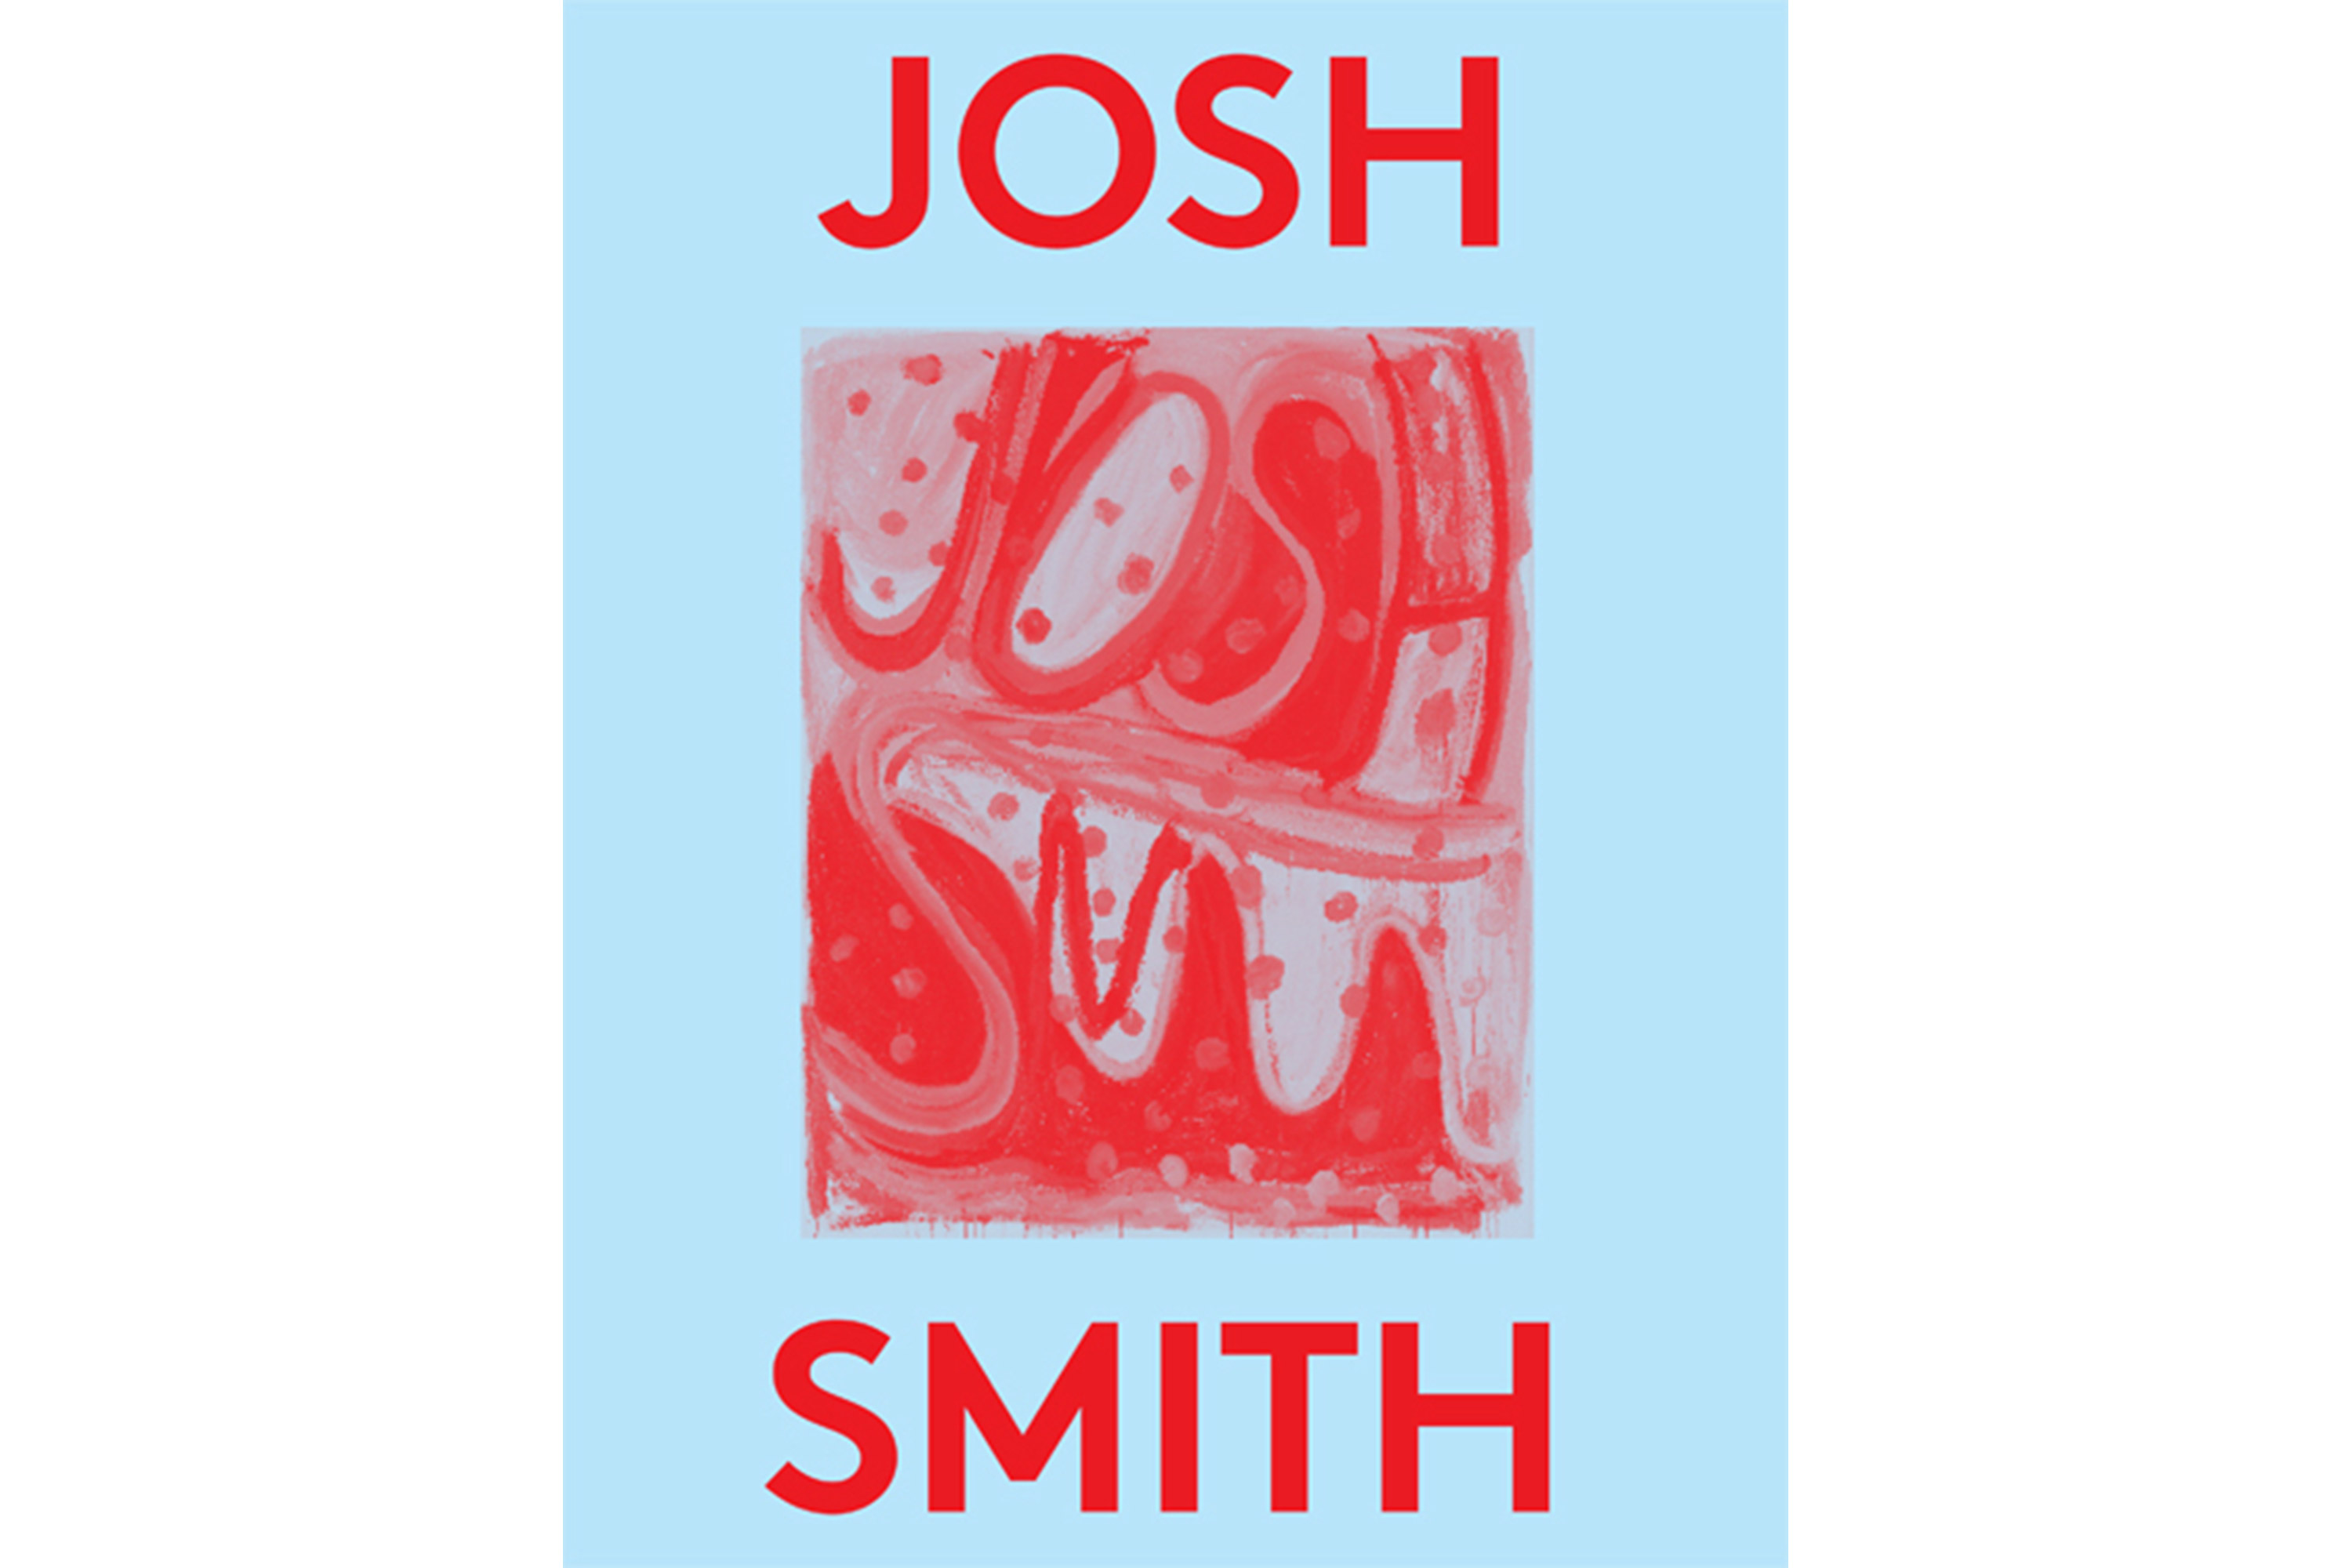 Josh Smith, Parkett Book Collage (2009), Available for Sale